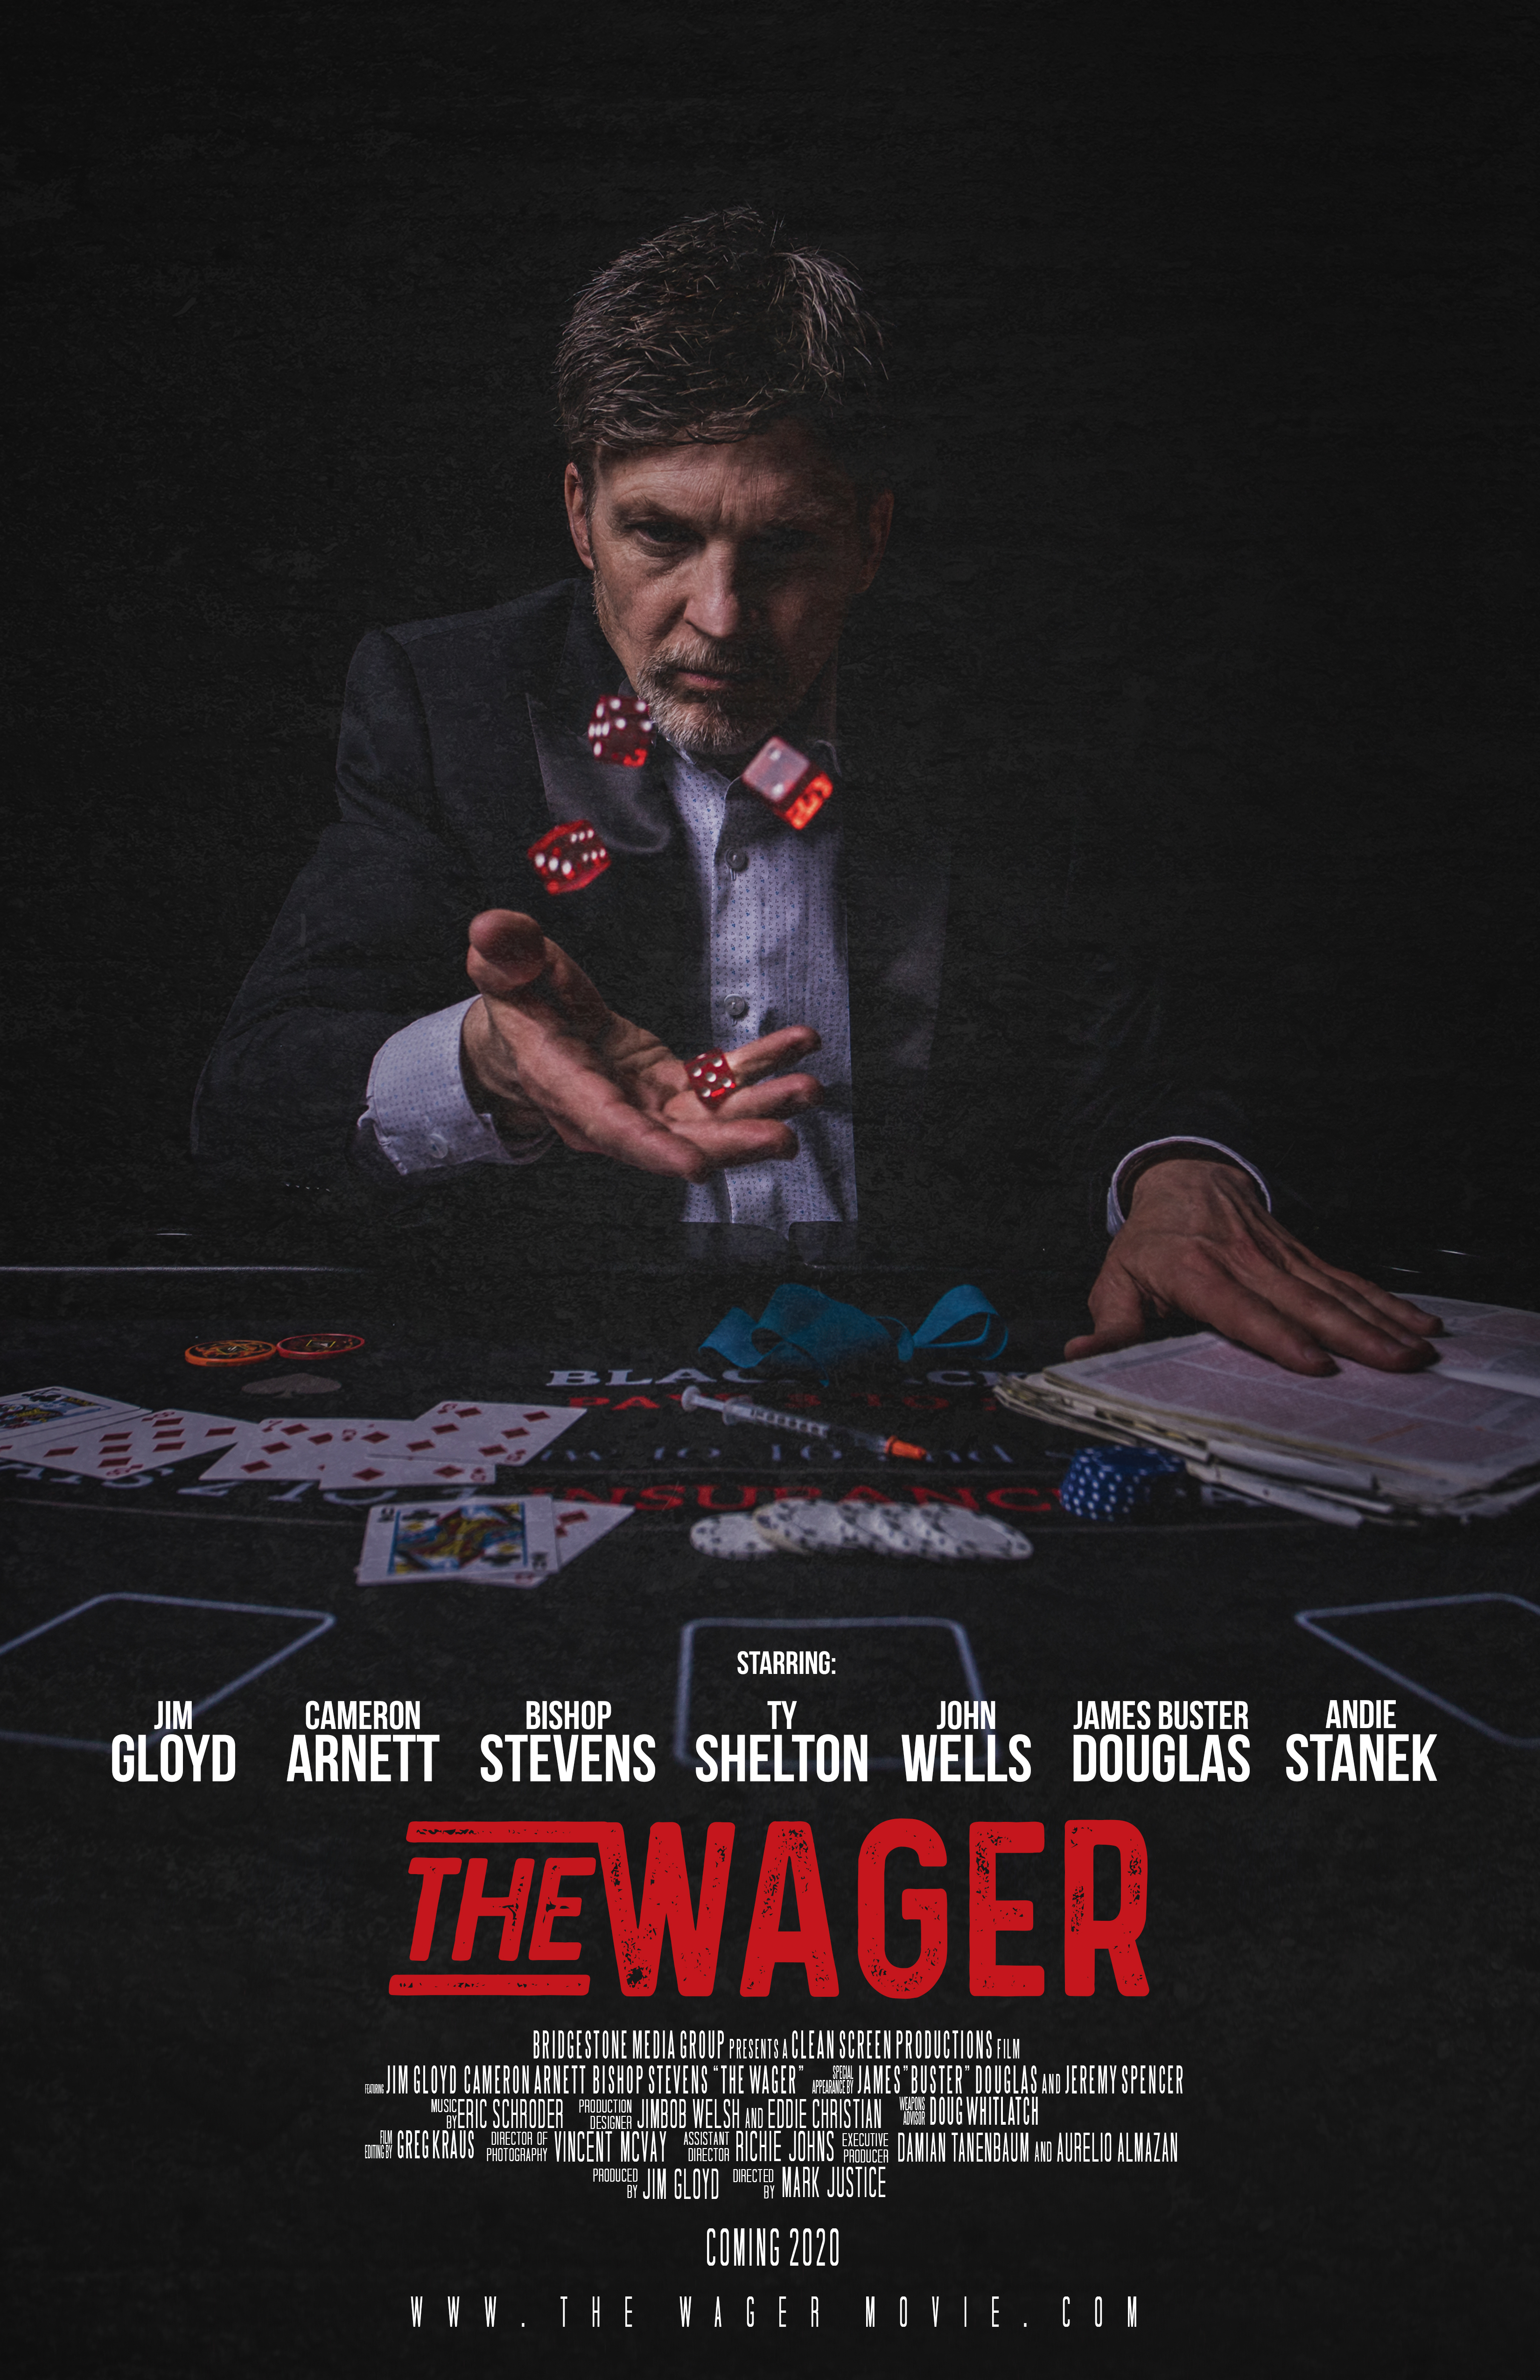 The Wager (2017)